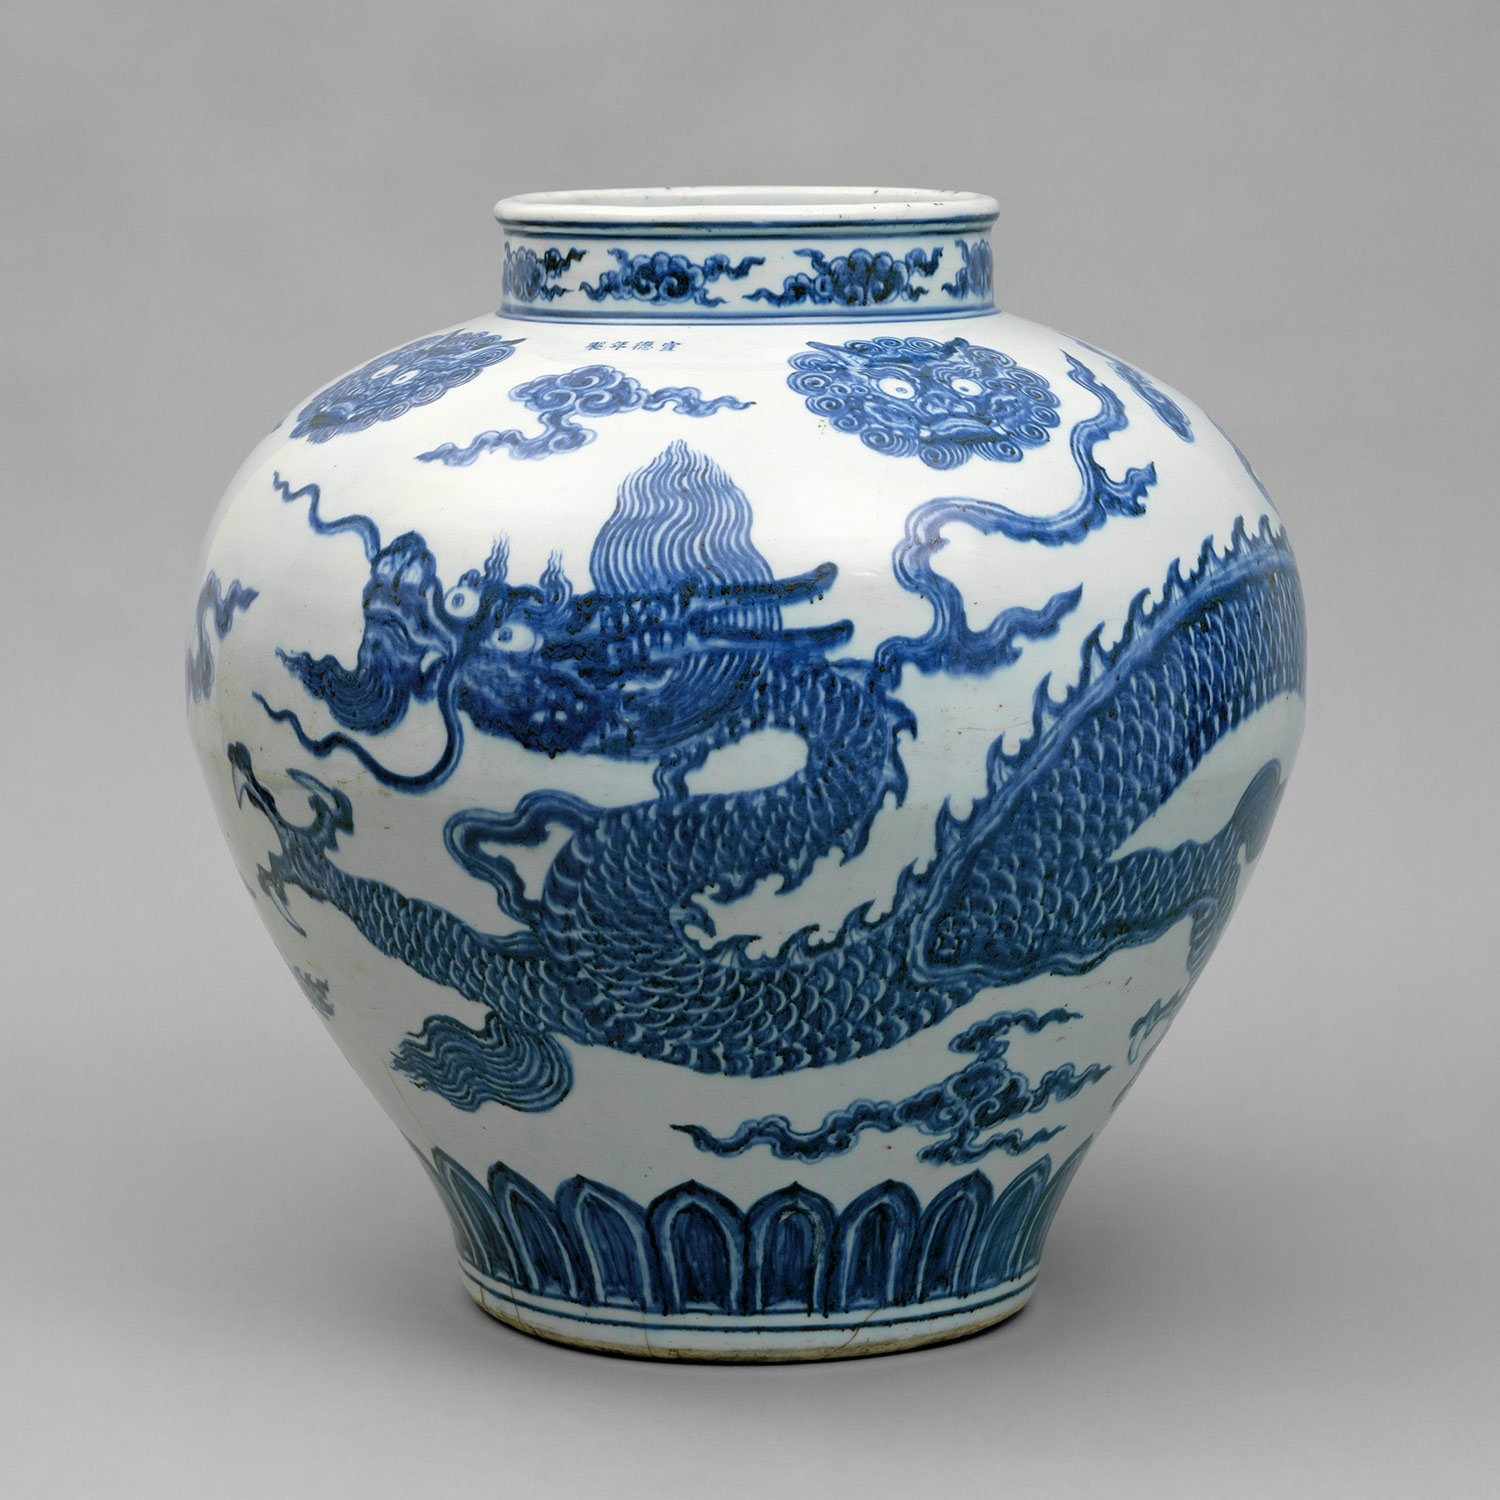 Ming Dynasty: Inventions: Porcelain